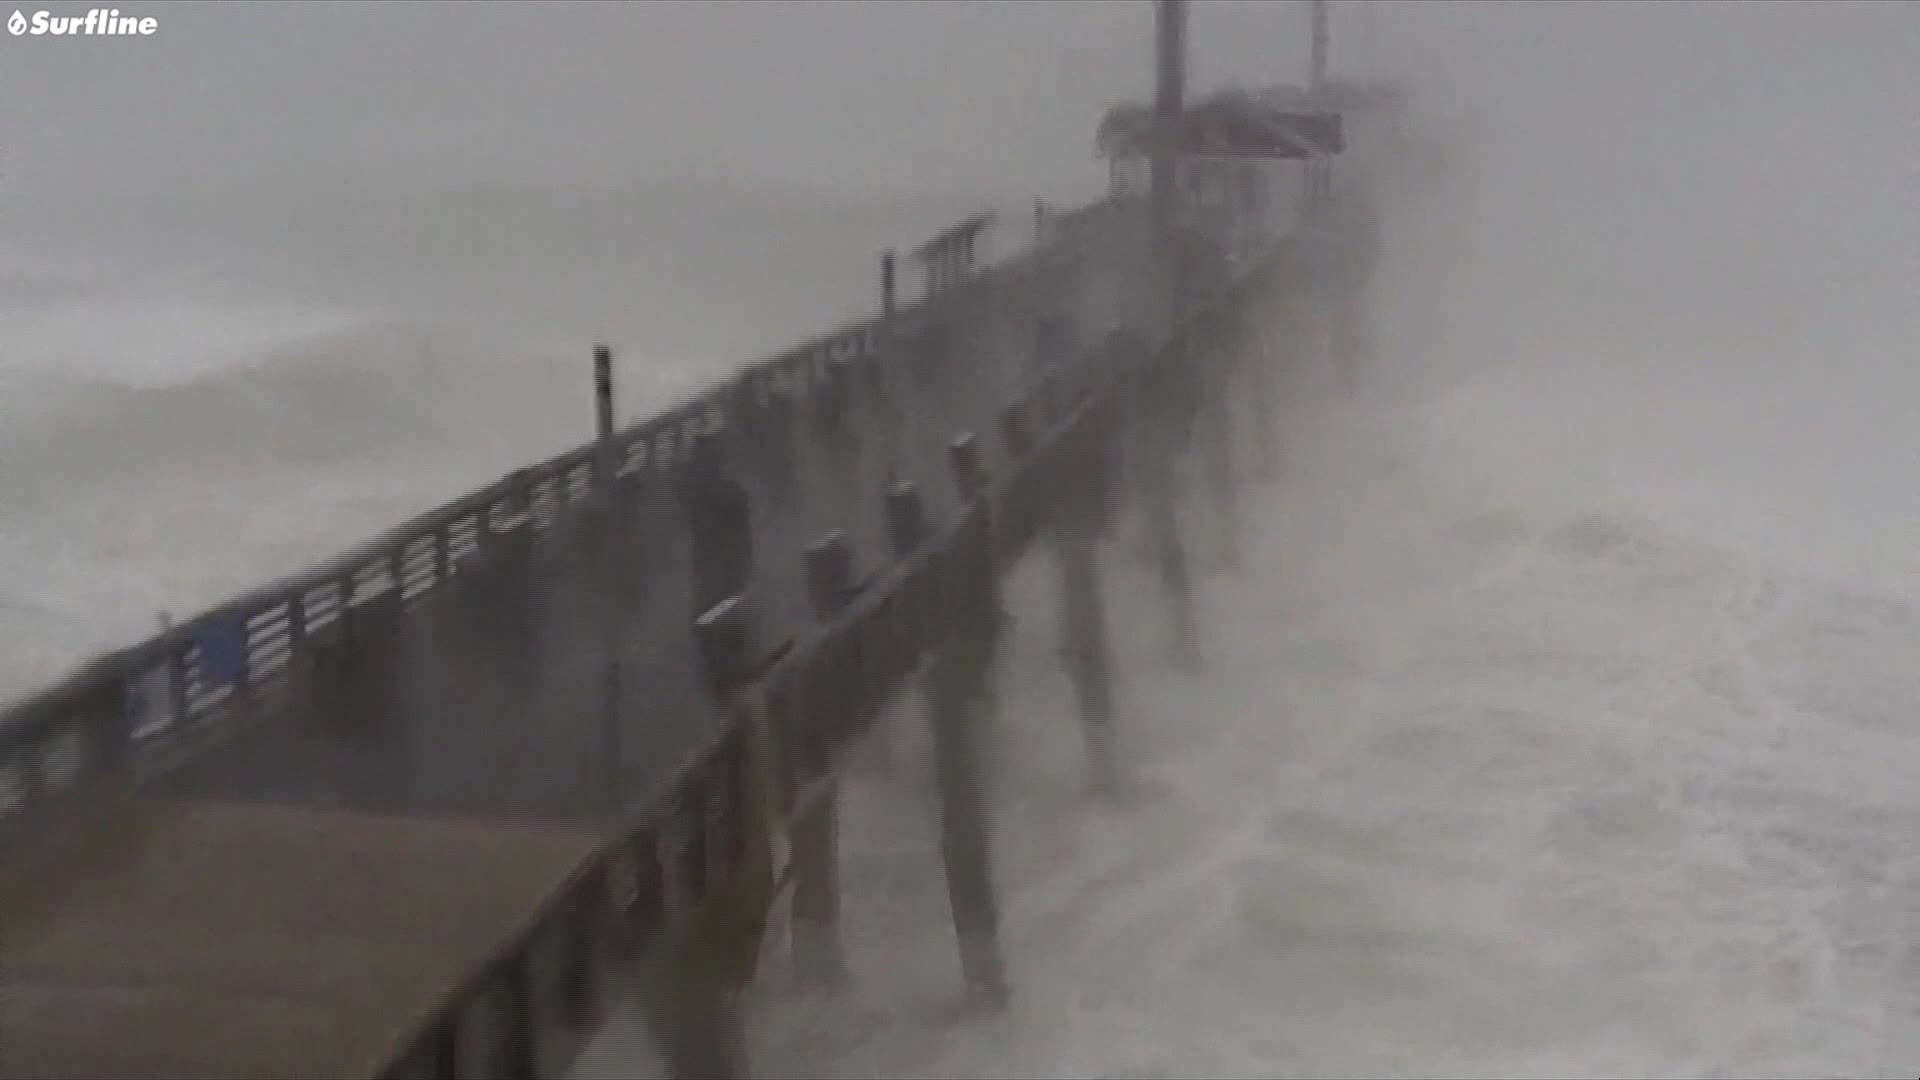 Hurricane Dorian has come ashore on the southern tip of North Carolina’s Outer Banks. The storm pounded the region with top sustained winds of 90 miles-an-hour and sheets of rain.